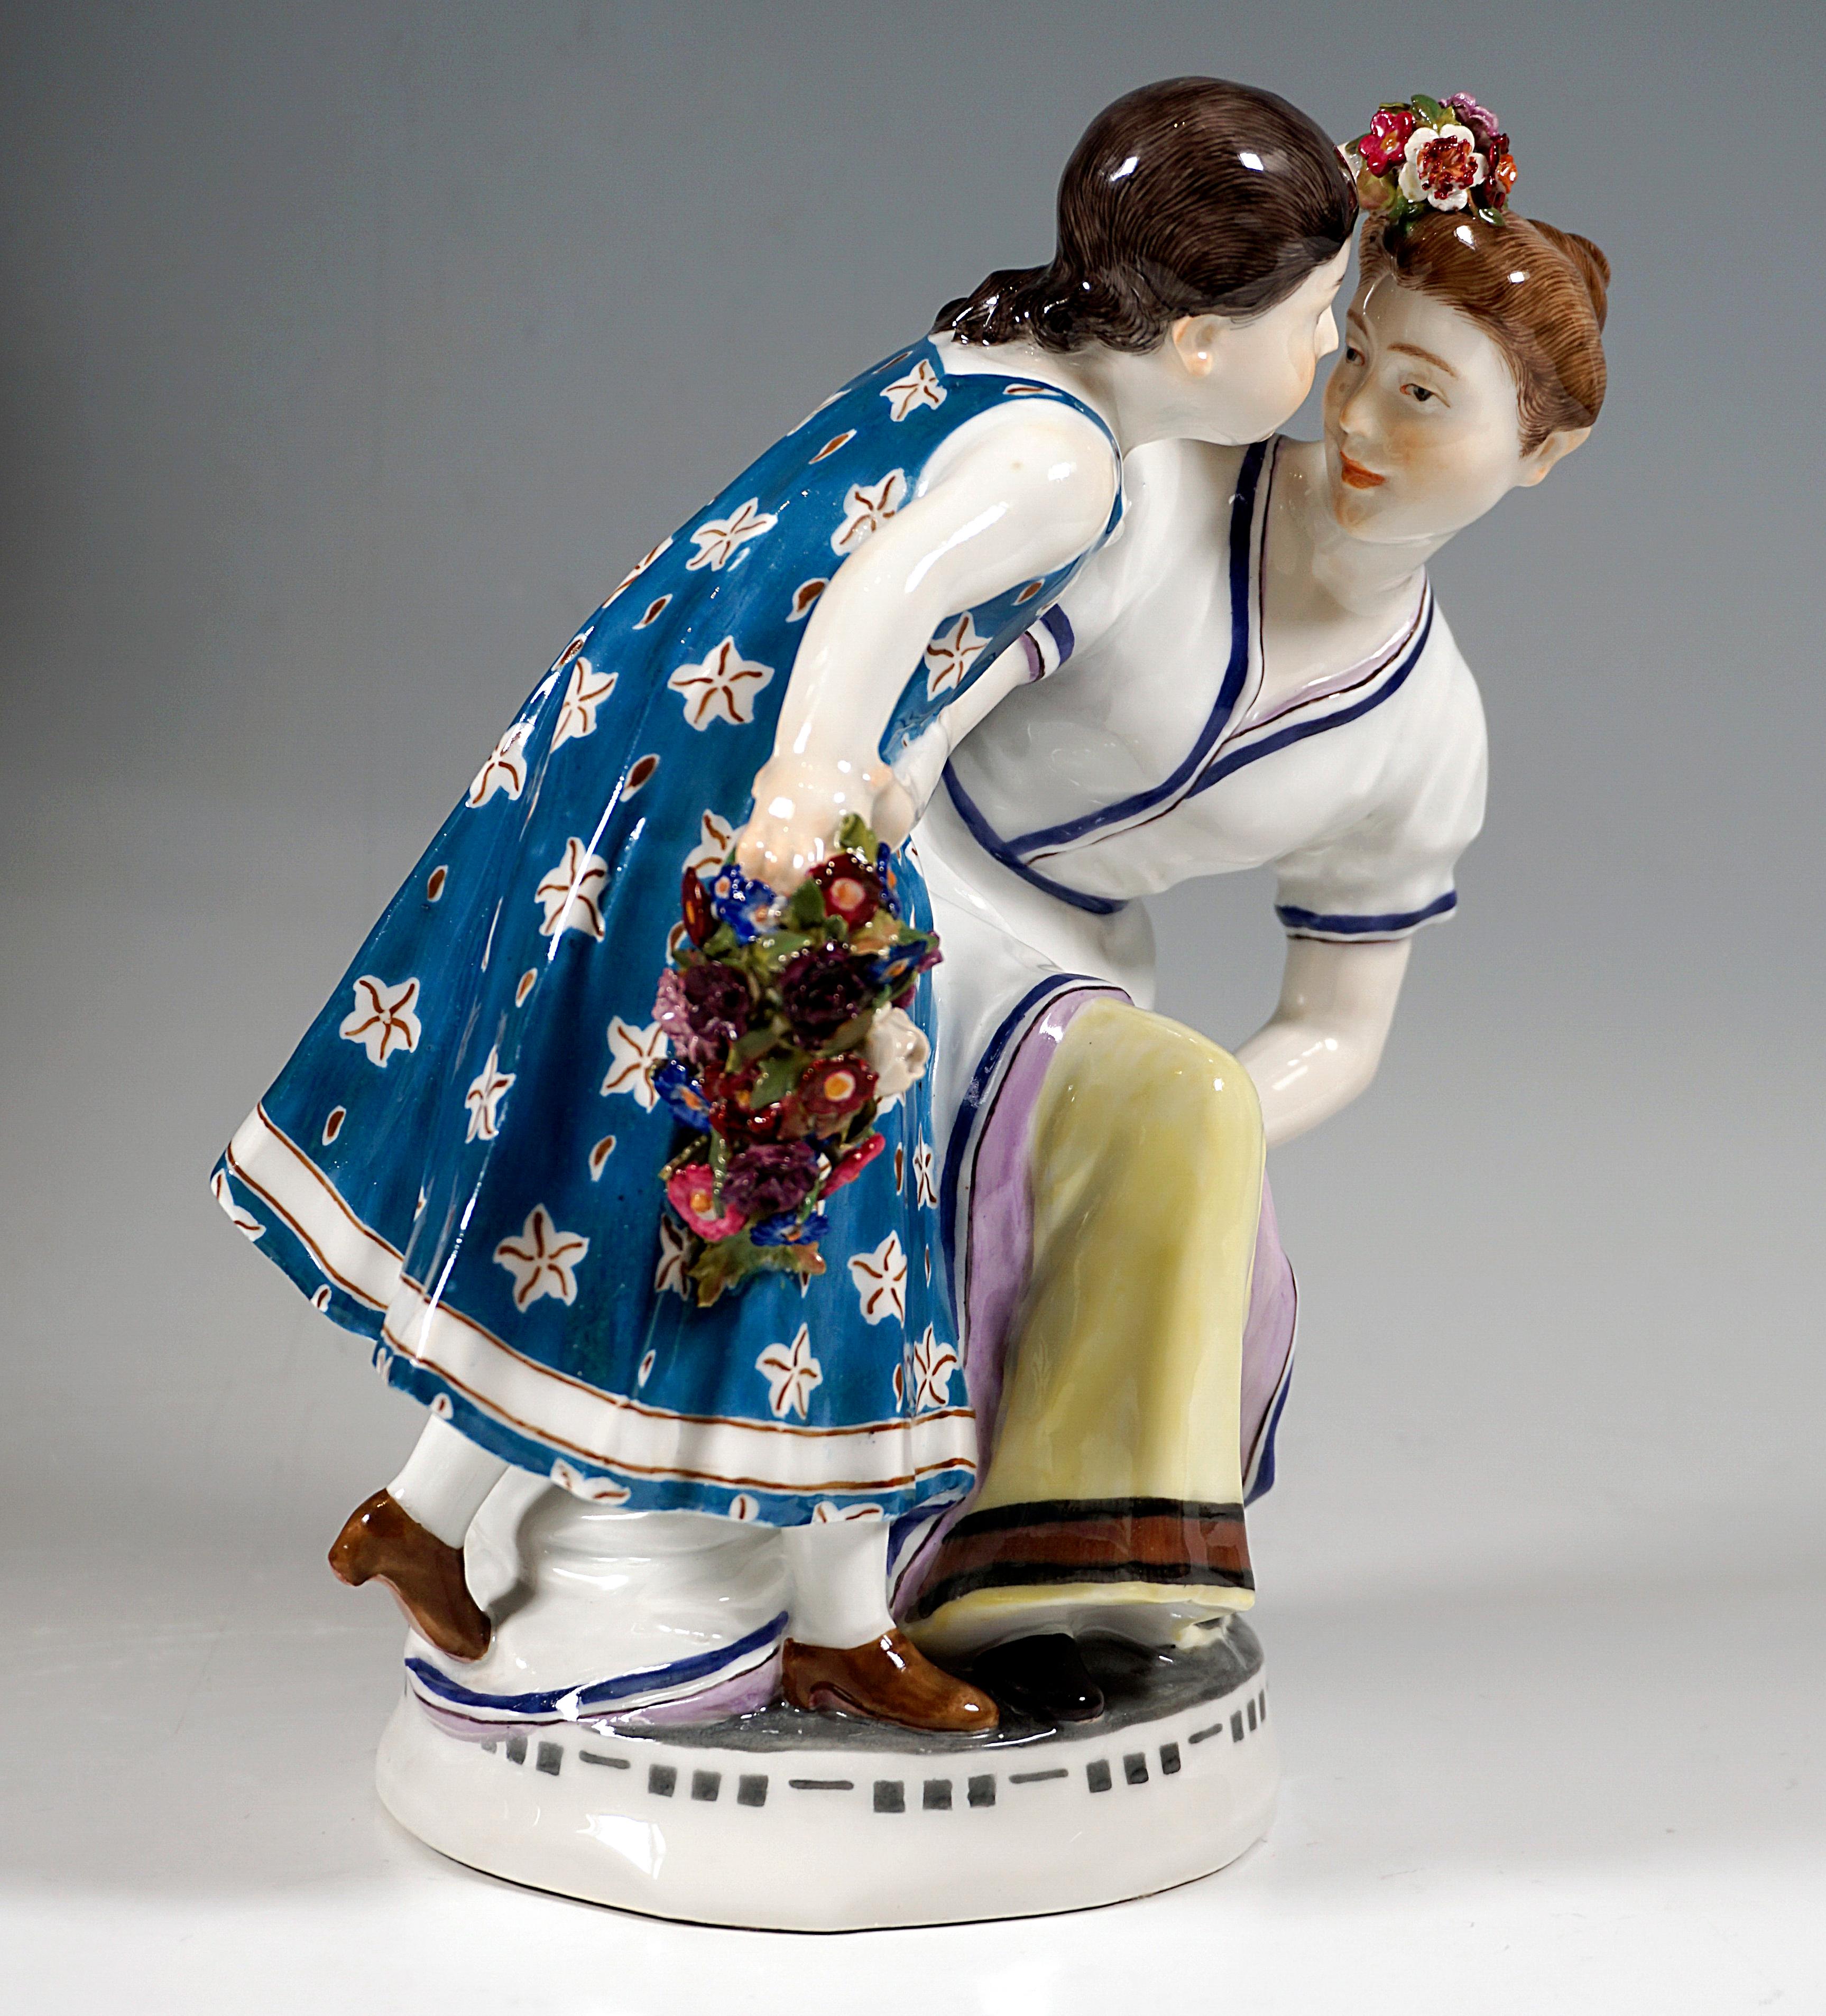 Extremely rare Meissen Art Nouveau porcelain group:
Two girls in clothing of circa 1900, the elder with hair pinned up in a bun in a blue fringed white dress with a yellow petticoat crouching next to a little girl in a blue dress with white